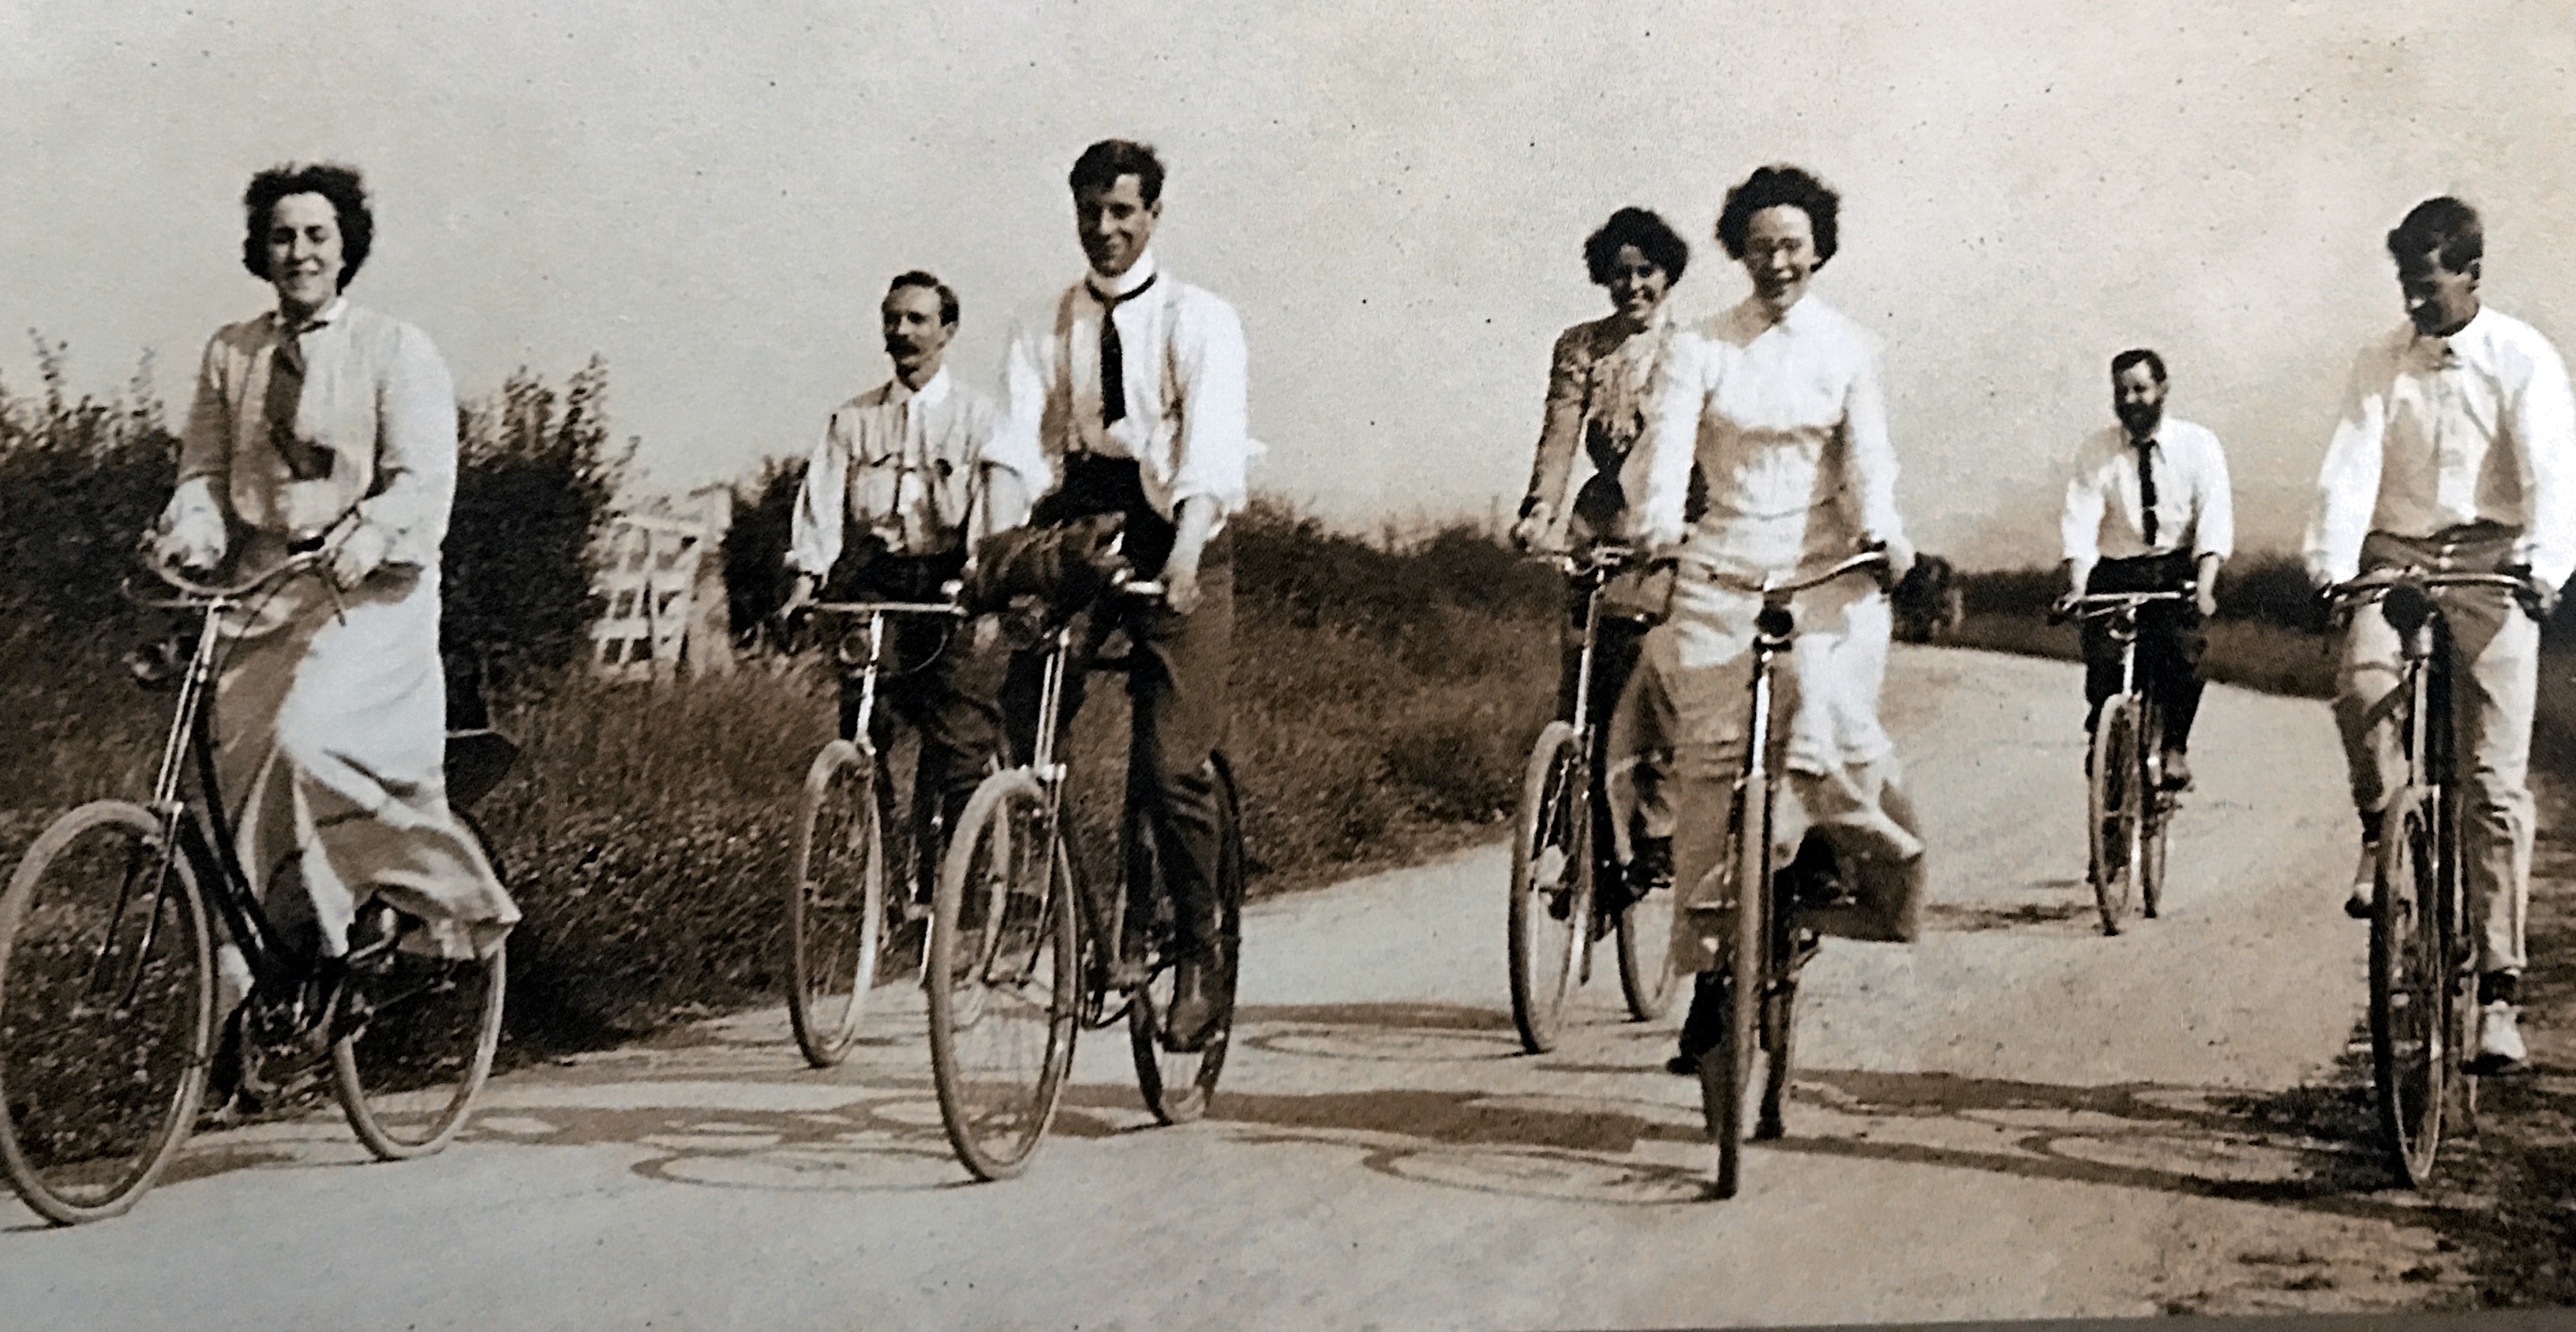 Howes family outing near Oxford circa 1912